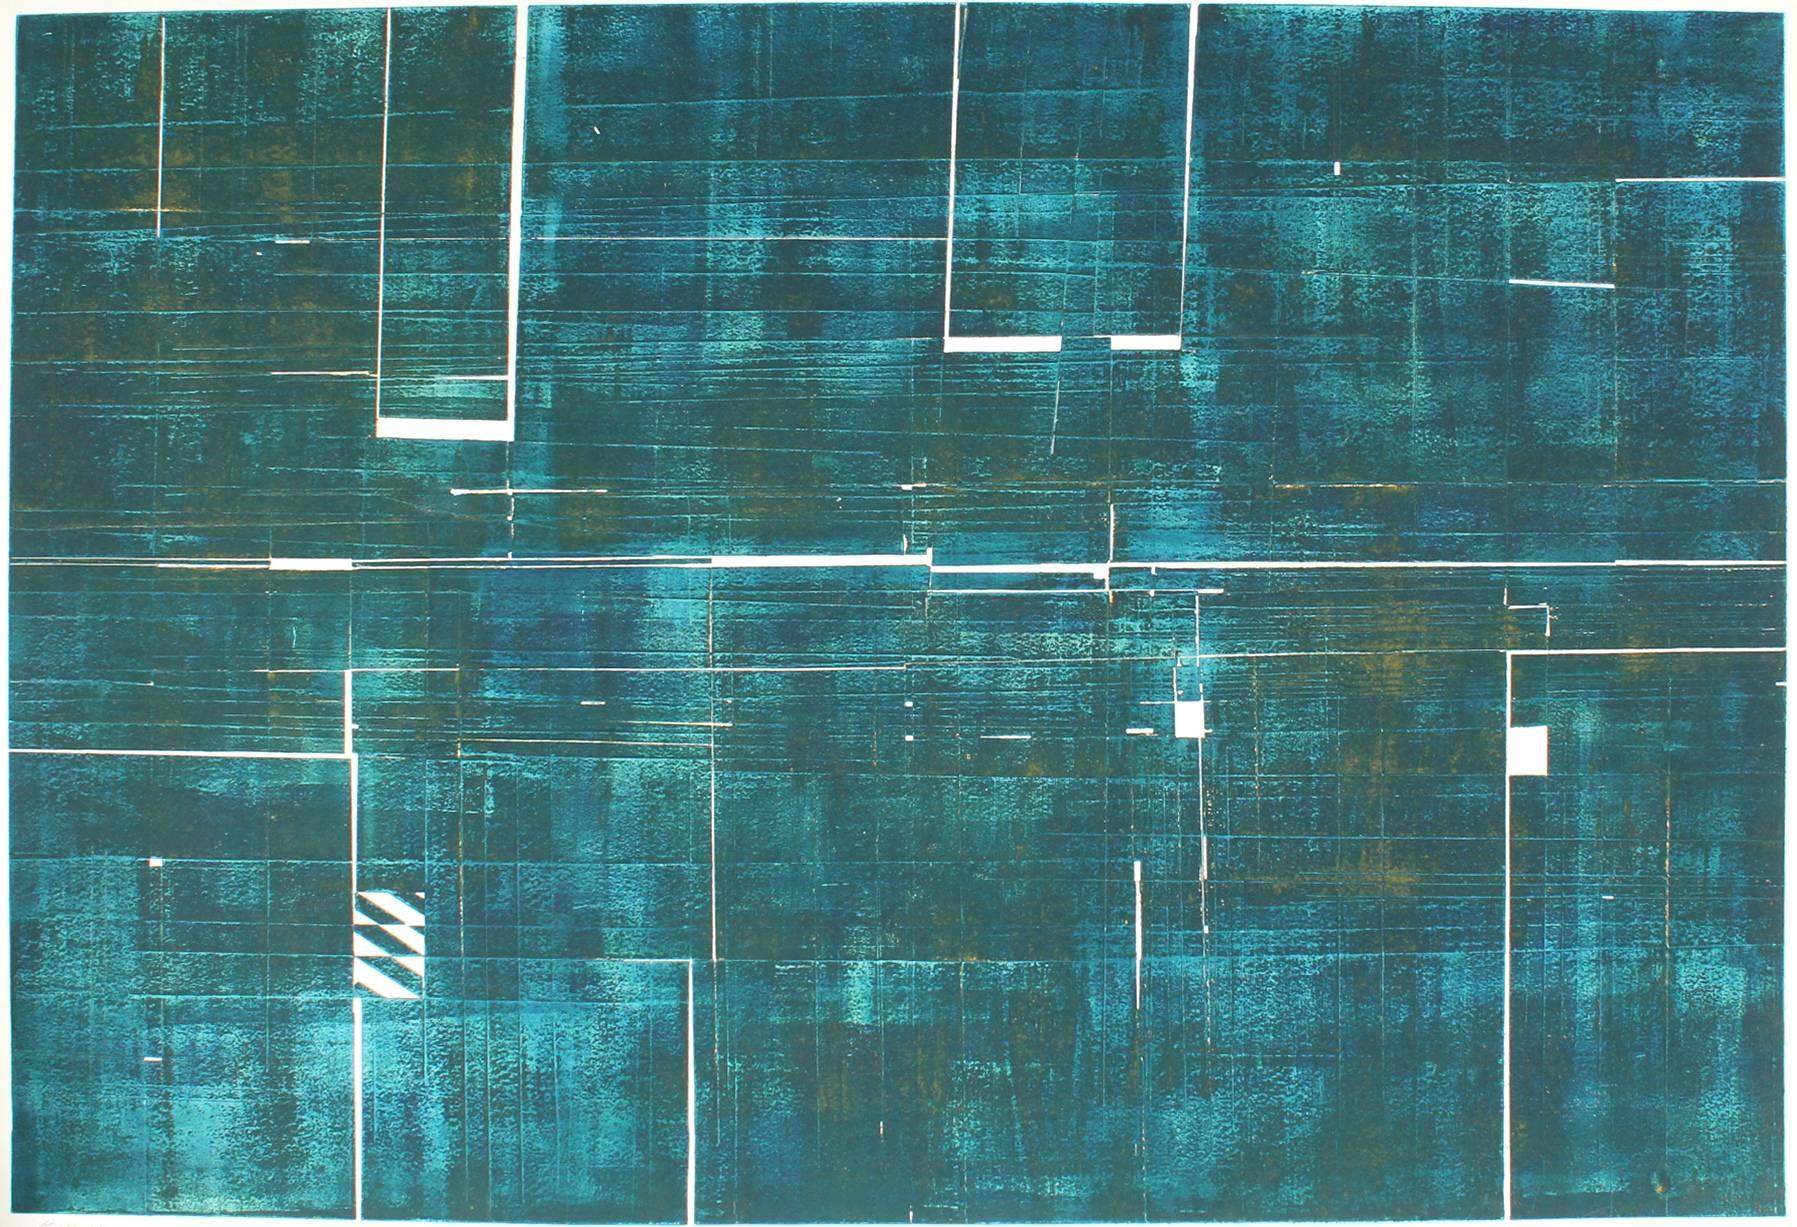 This mid 20th century teal abstract collograph and embossed print entitled "Antarctica Metamorphosis" is by Santa Fe artist Seymour Tubis (1919-1993). Tubis studied at the Art Students League with Hans Hofmann (1946-1949). He exhibited in Paris in